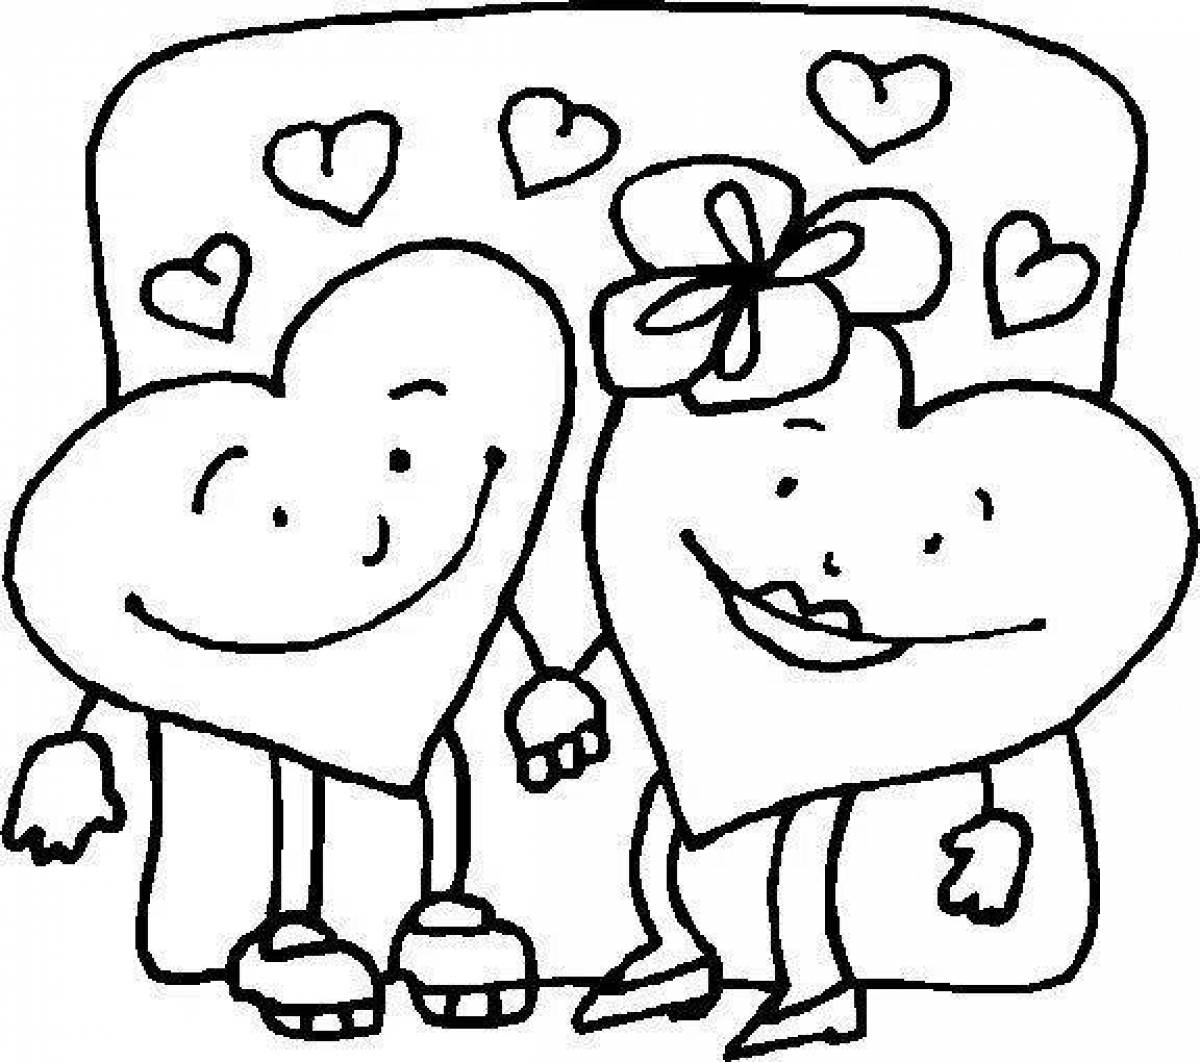 Great valentine's day coloring book